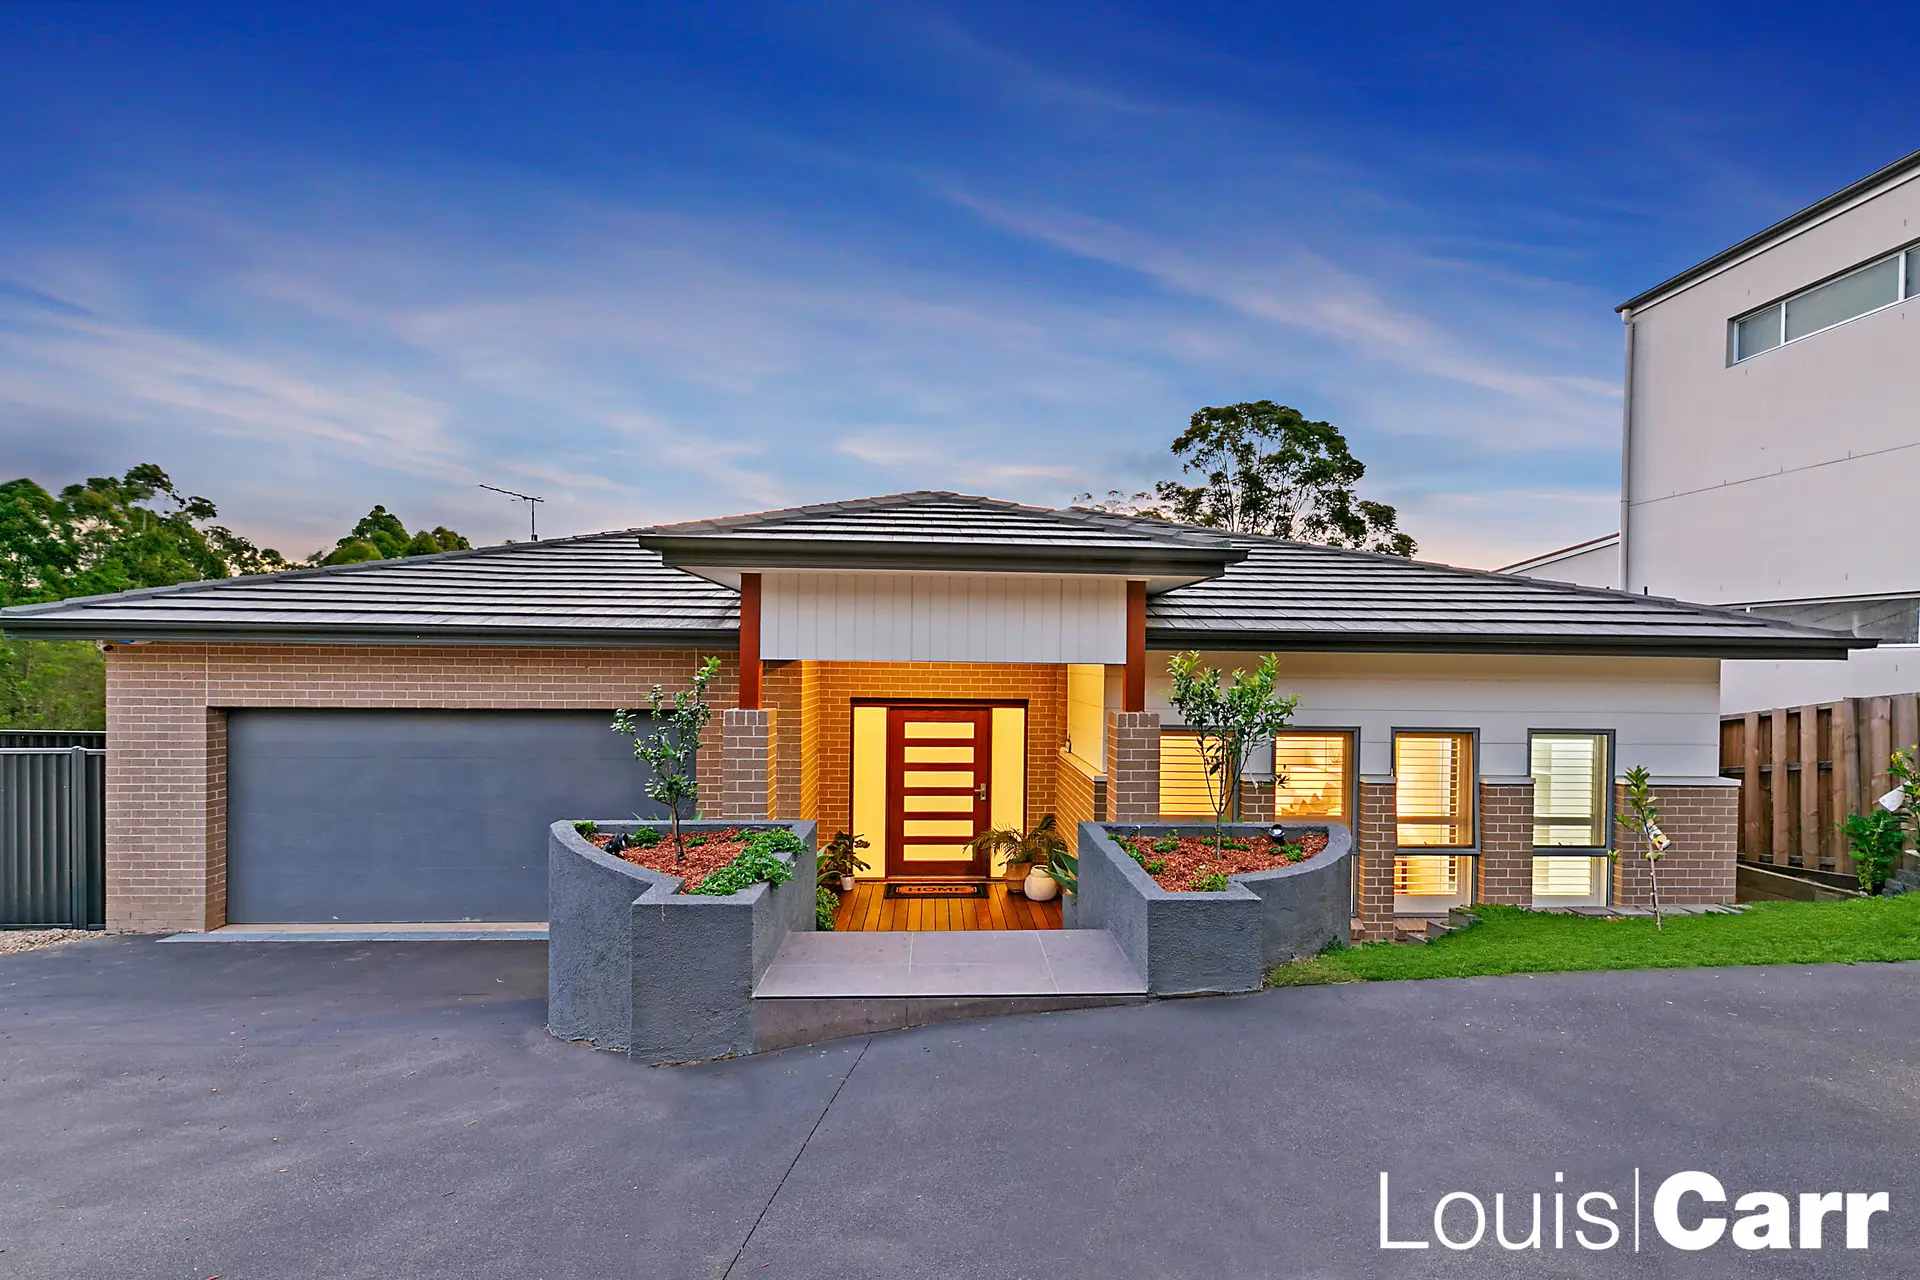 Photo #4: 45 Womurrung Avenue, Castle Hill - Sold by Louis Carr Real Estate